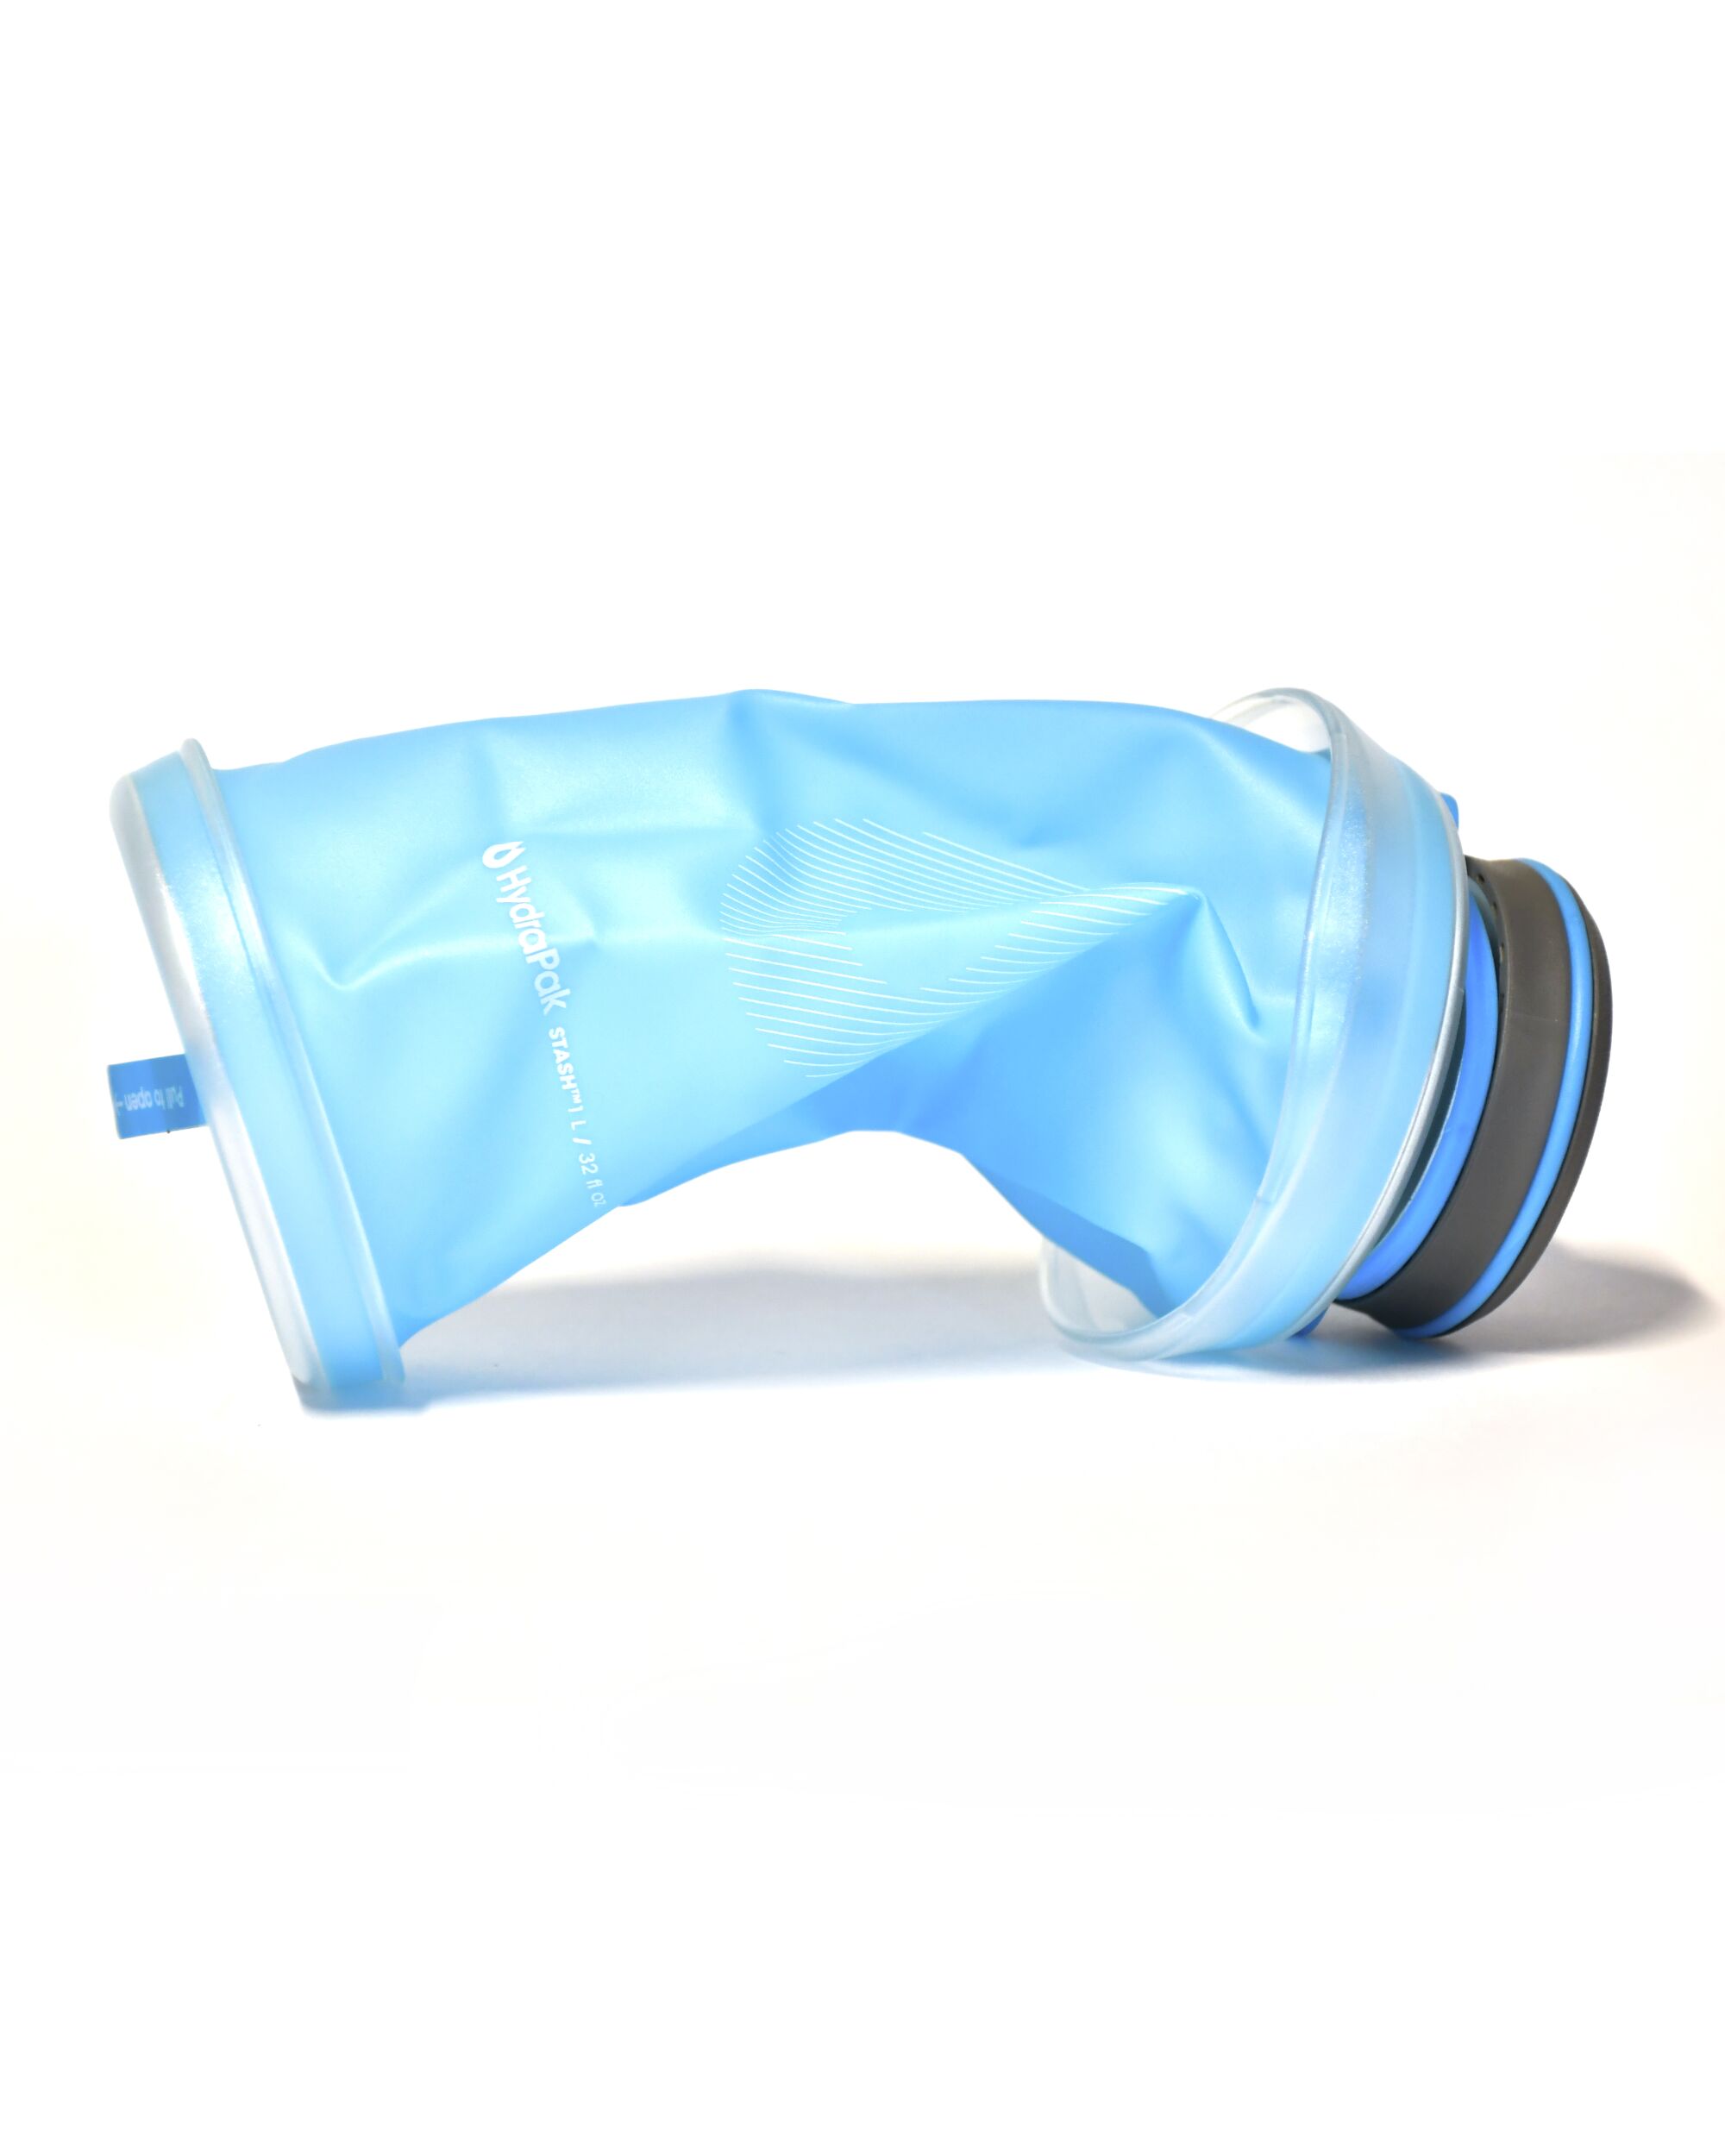 HydraPack Stash, 1-Litre Collapsible Water Bottle